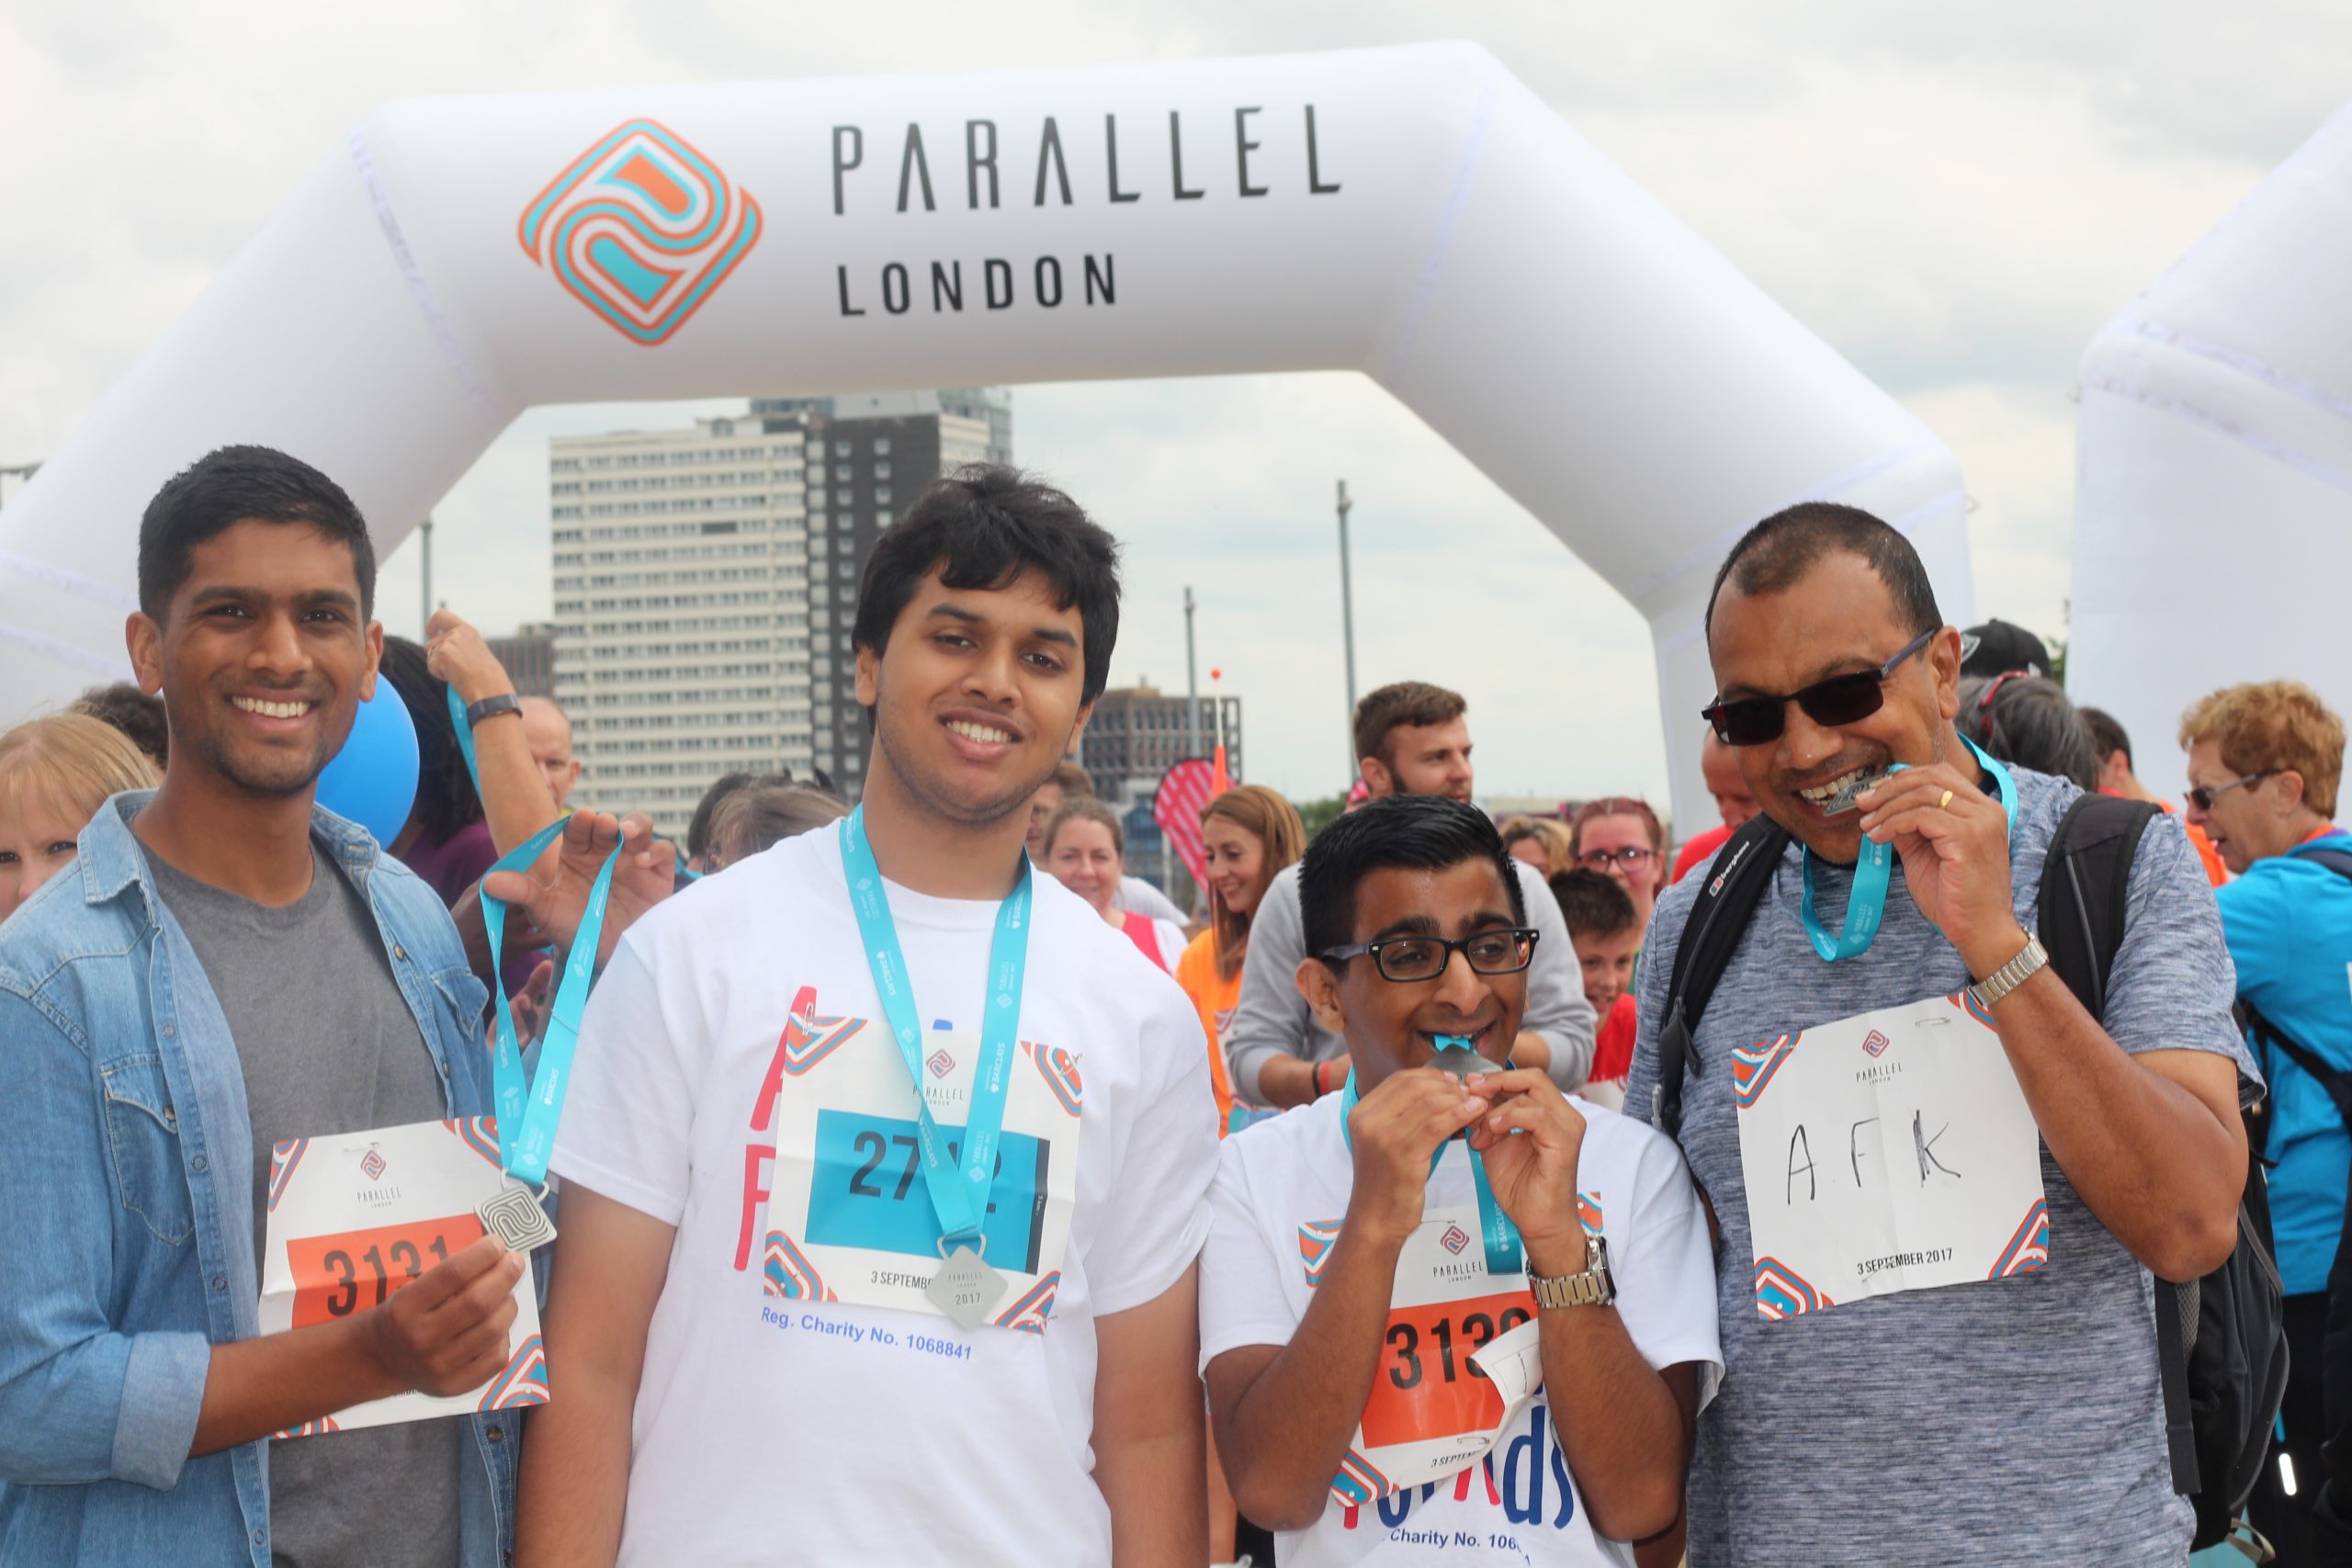 Group of young people at the Parallel London finish line with their medals